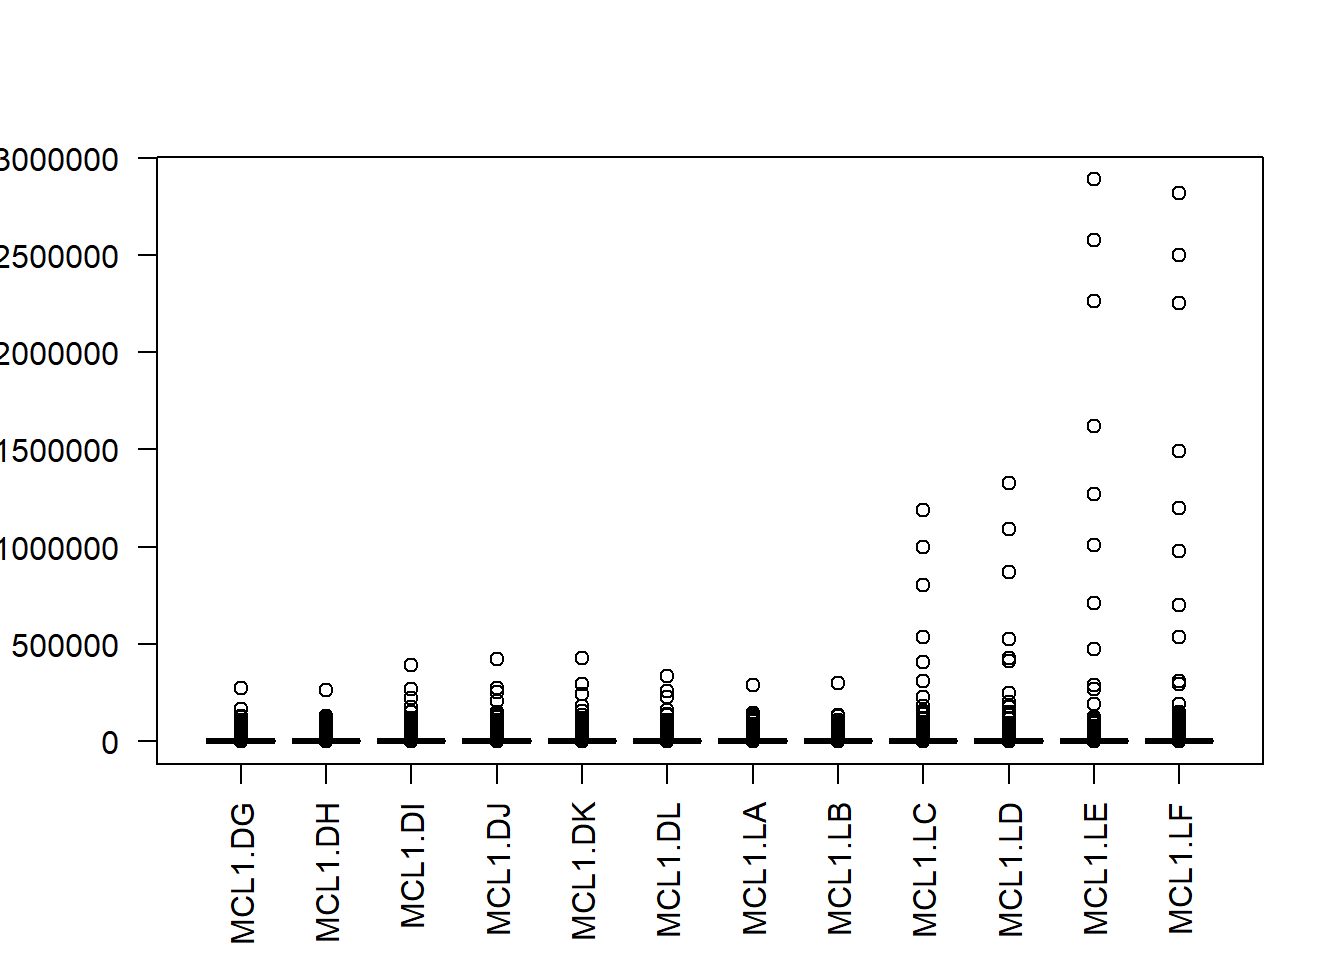 Distribution of counts across the 12 samples. Note they are not normally-distributed.